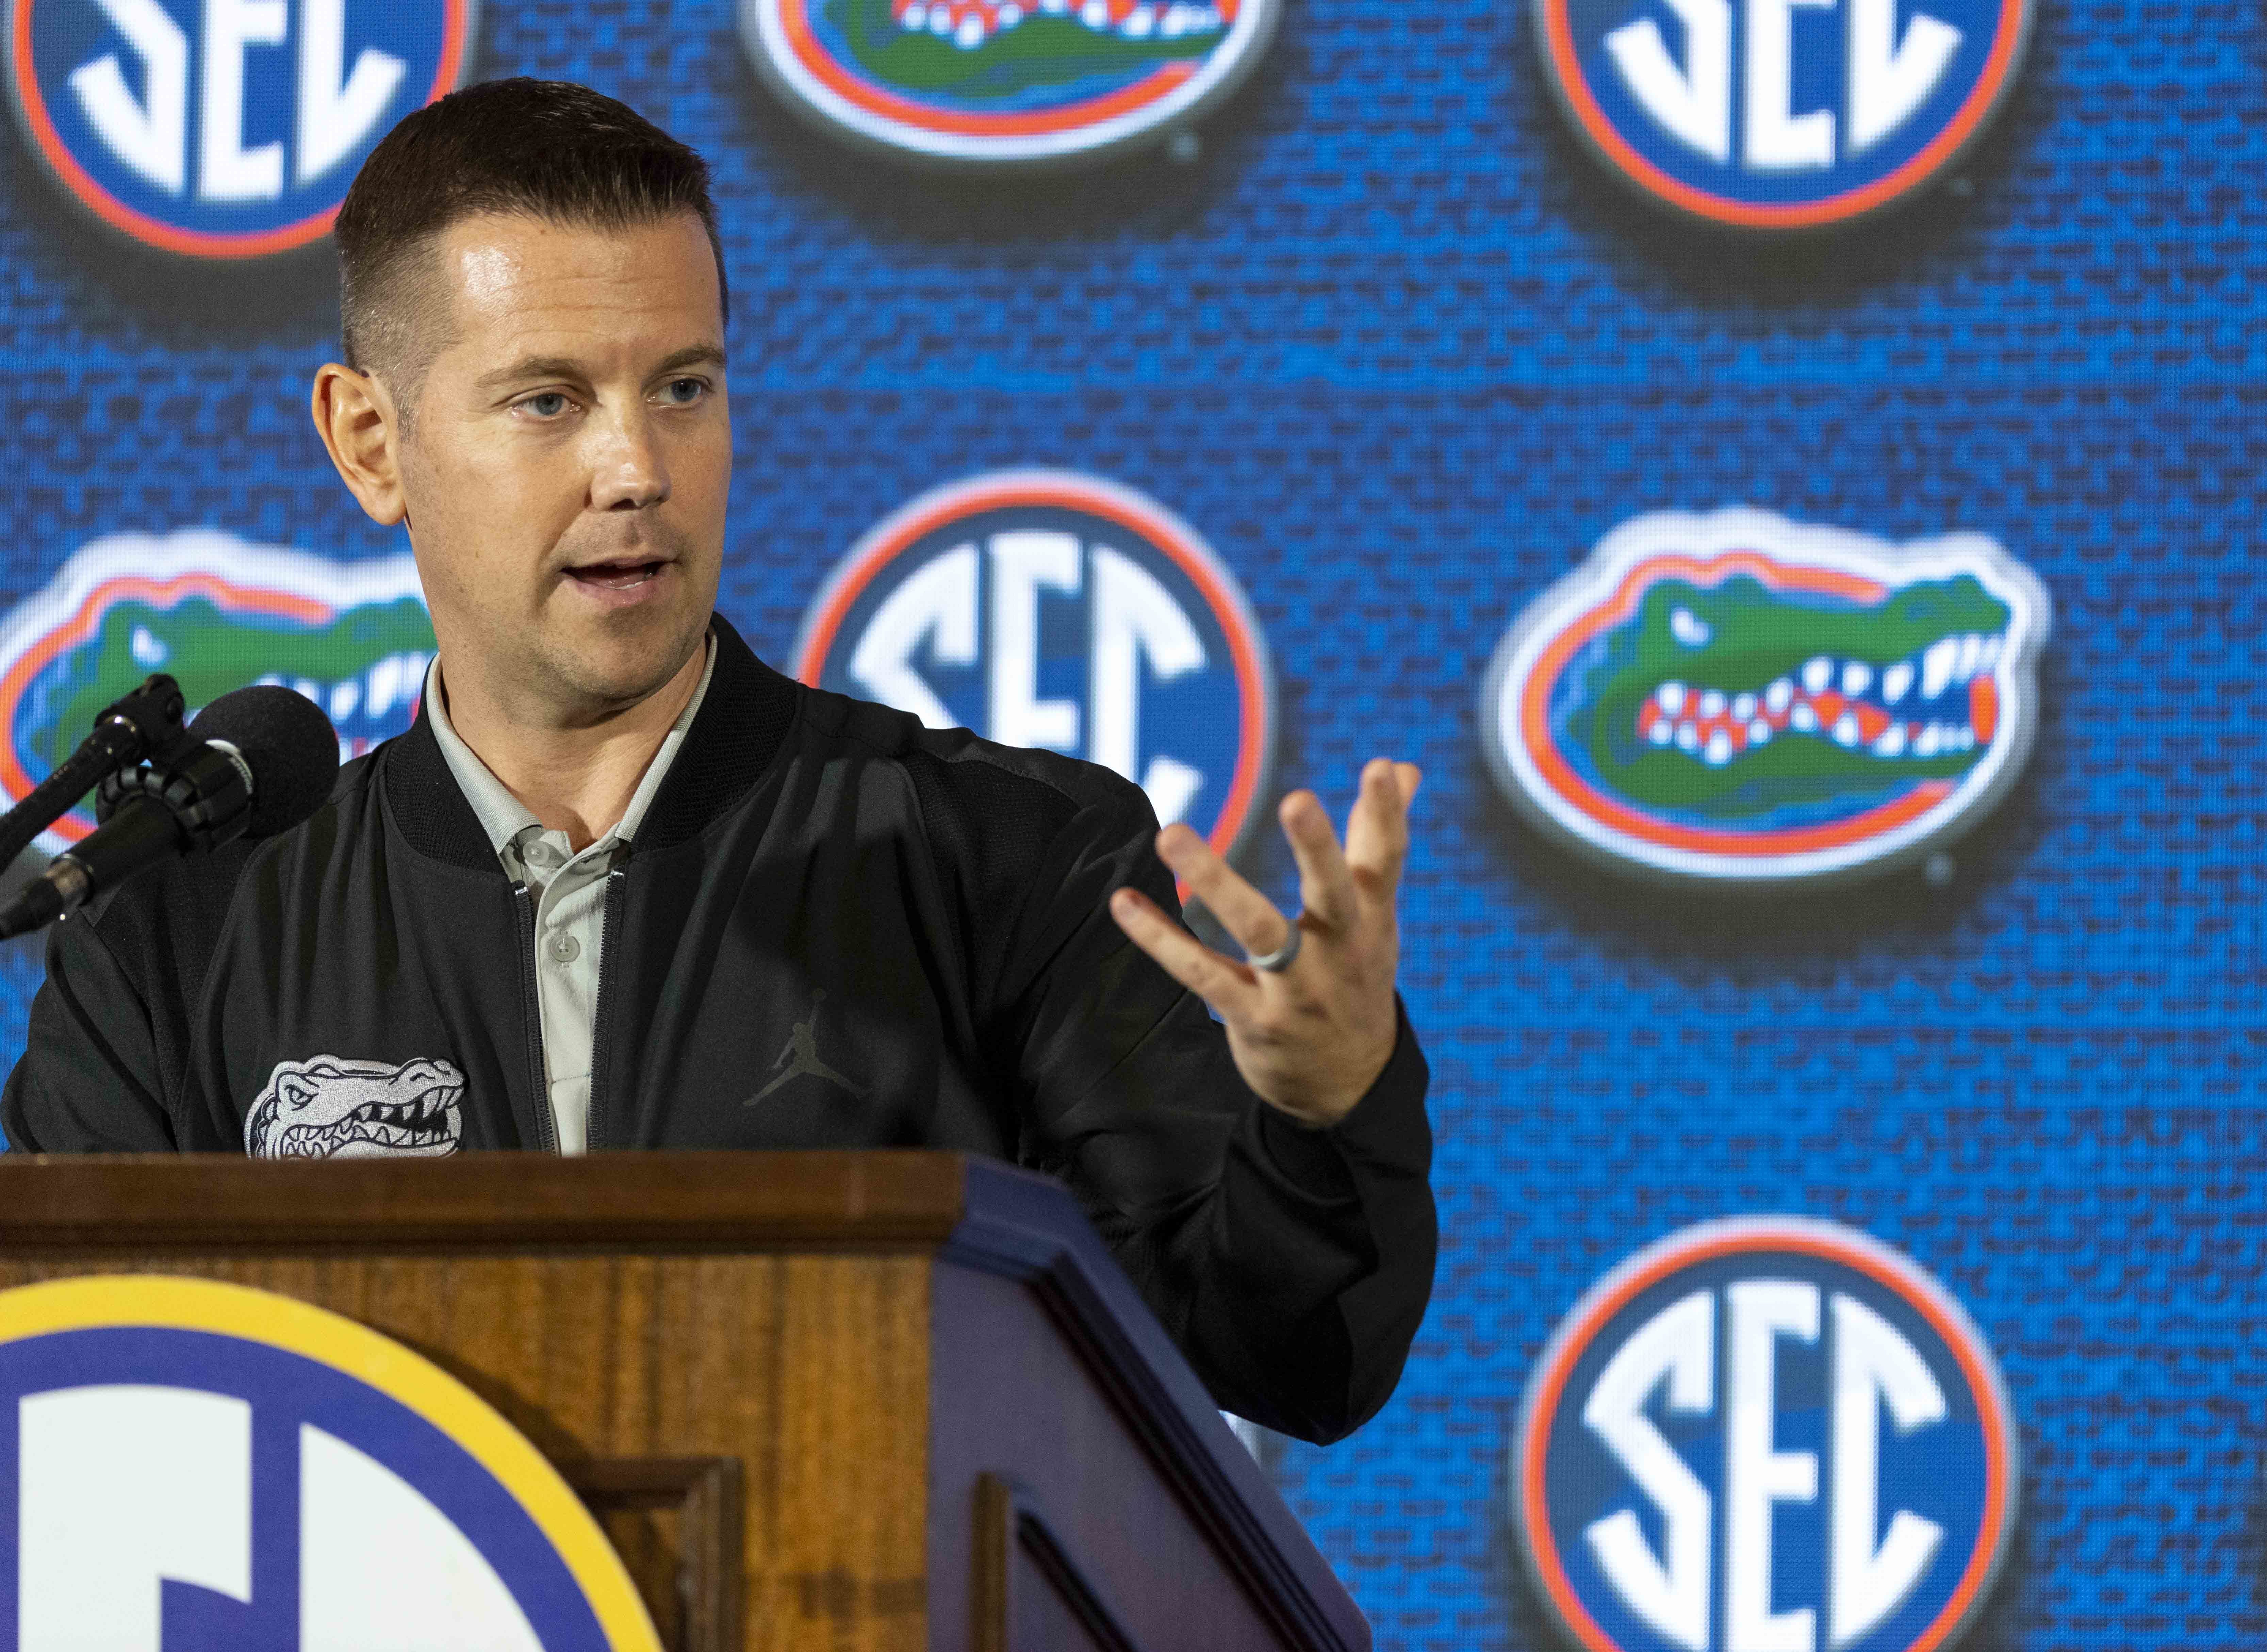 Florida's women's basketball coach resigns for 'personal reasons'